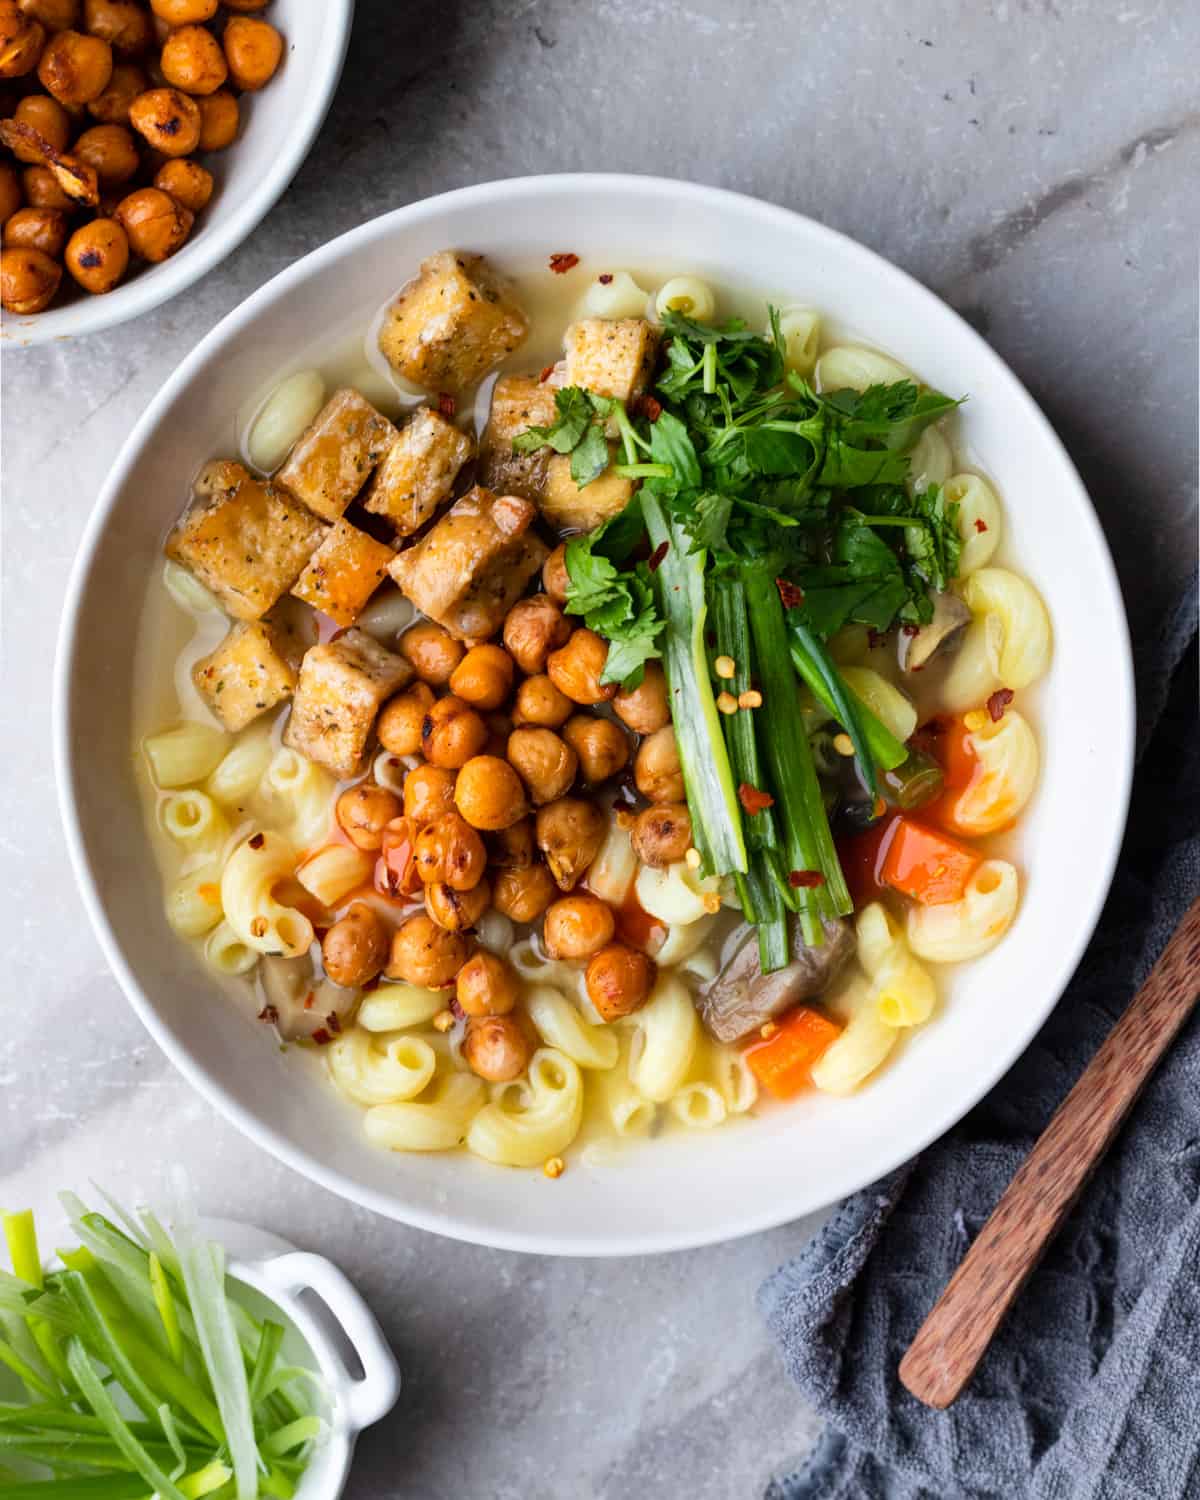 Top down image of a bowl of vegetable soup made with gluten free noddles topped with cripsy baled tofu and chickpeas.